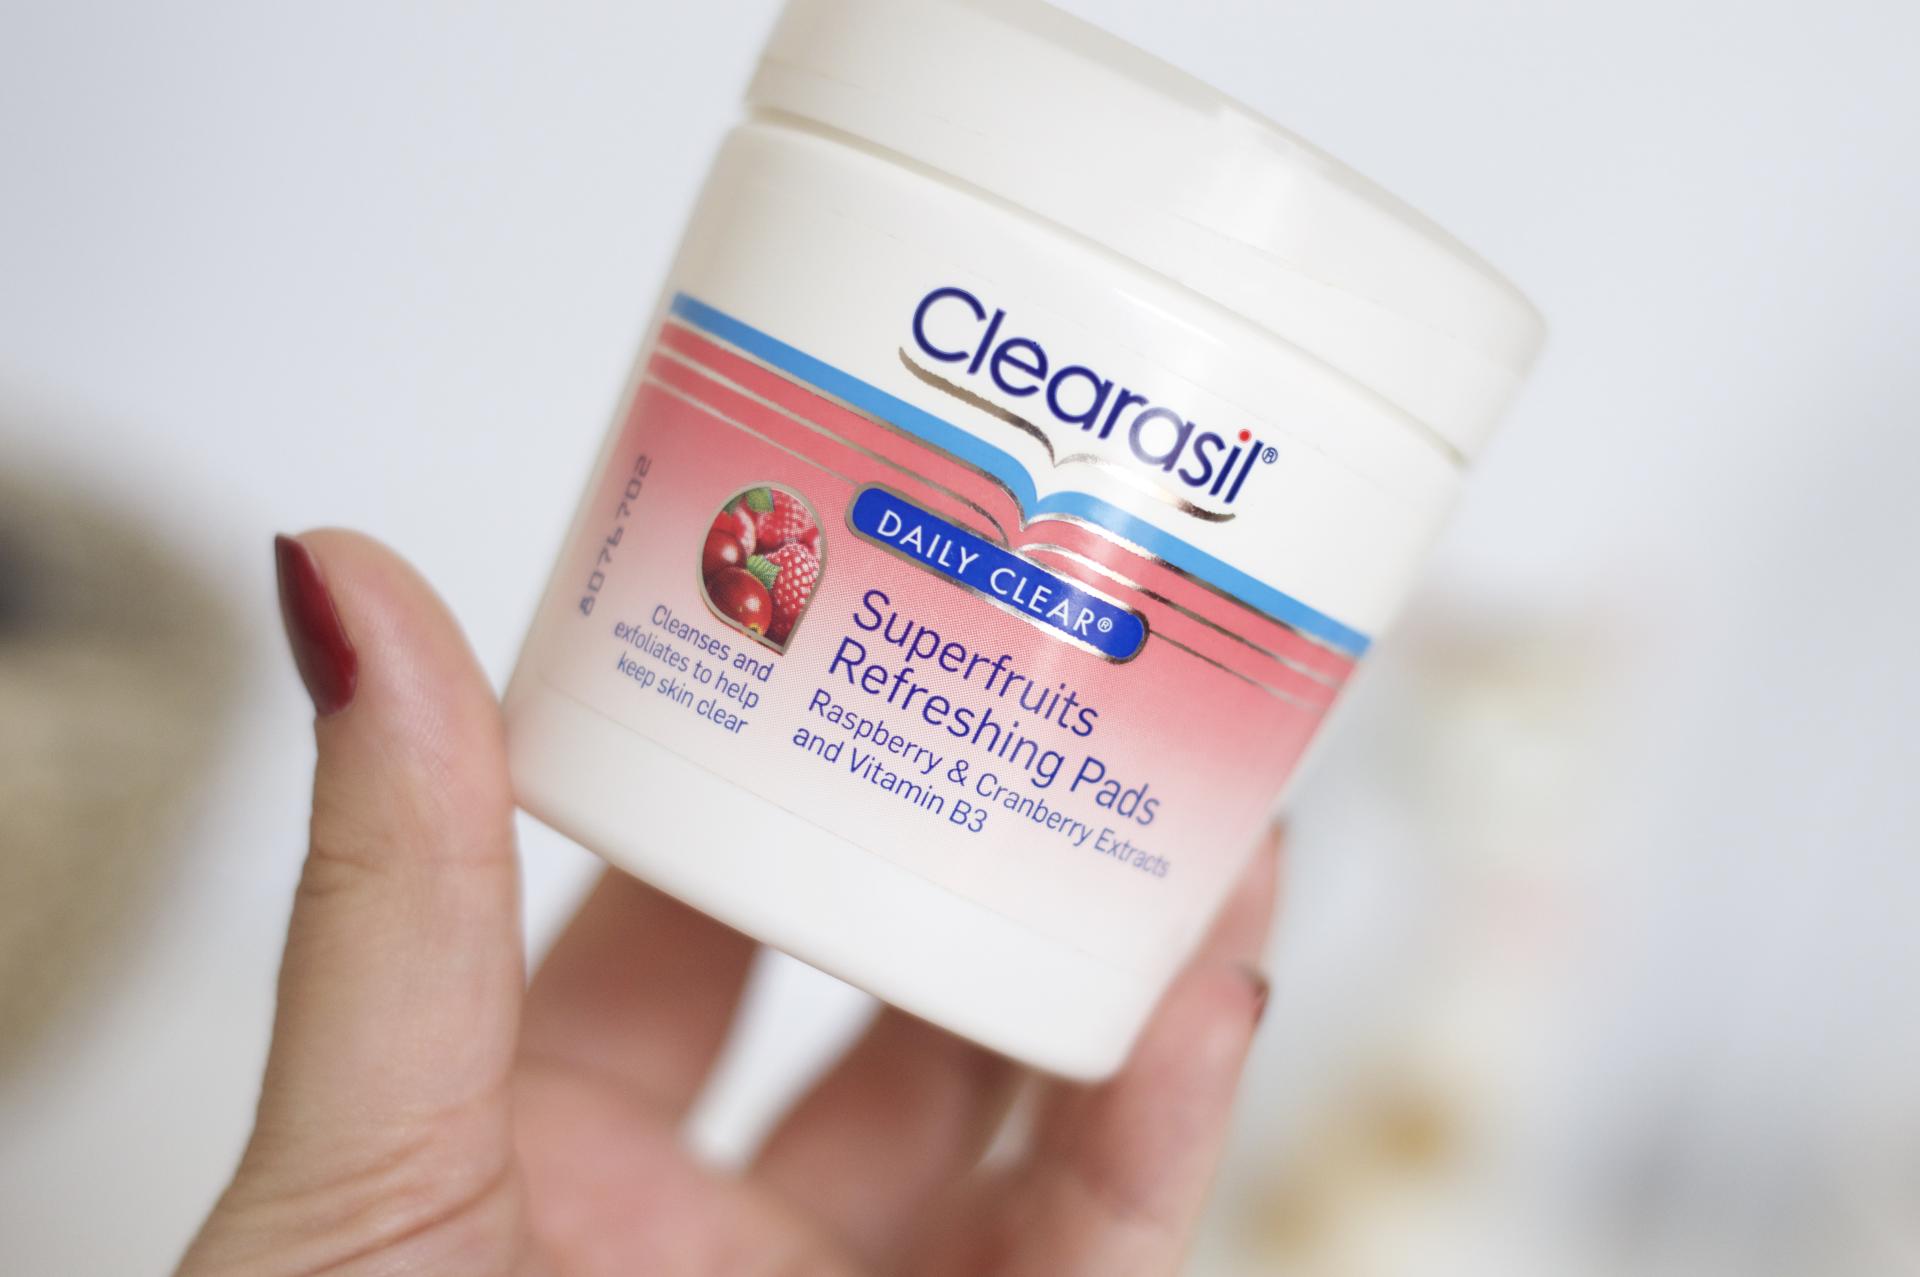 Made From Beauty Clearasil Daily Clear Superfruits Refreshing Pads Review Cover